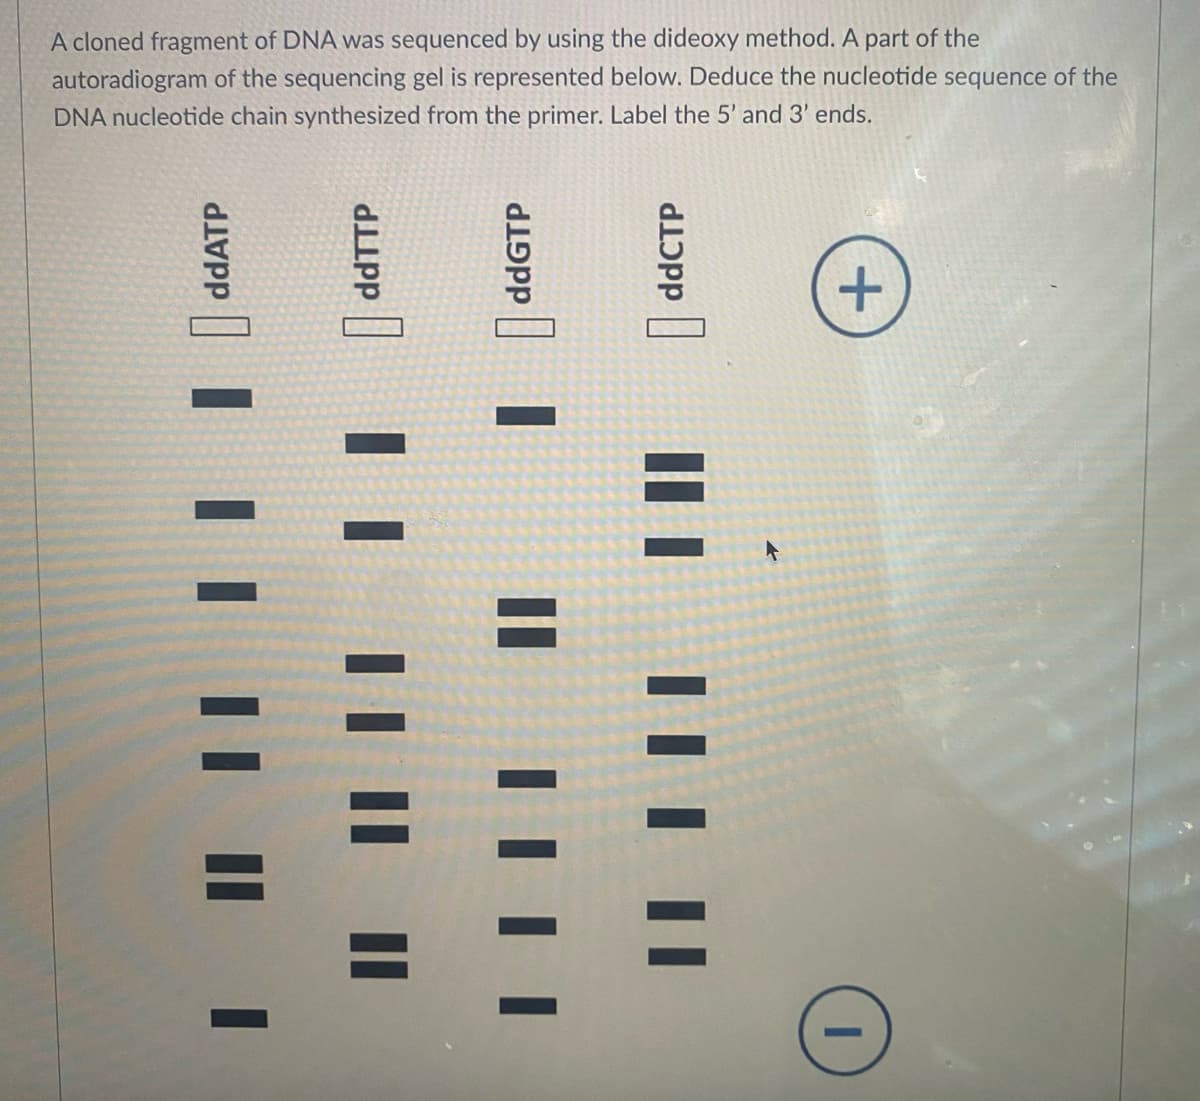 A cloned fragment of DNA was sequenced by using the dideoxy method. A part of the
autoradiogram of the sequencing gel is represented below. Deduce the nucleotide sequence of the
DNA nucleotide chain synthesized from the primer. Label the 5' and 3' ends.
ddATP
ddTTP
ddGTP
II
ddCTP
